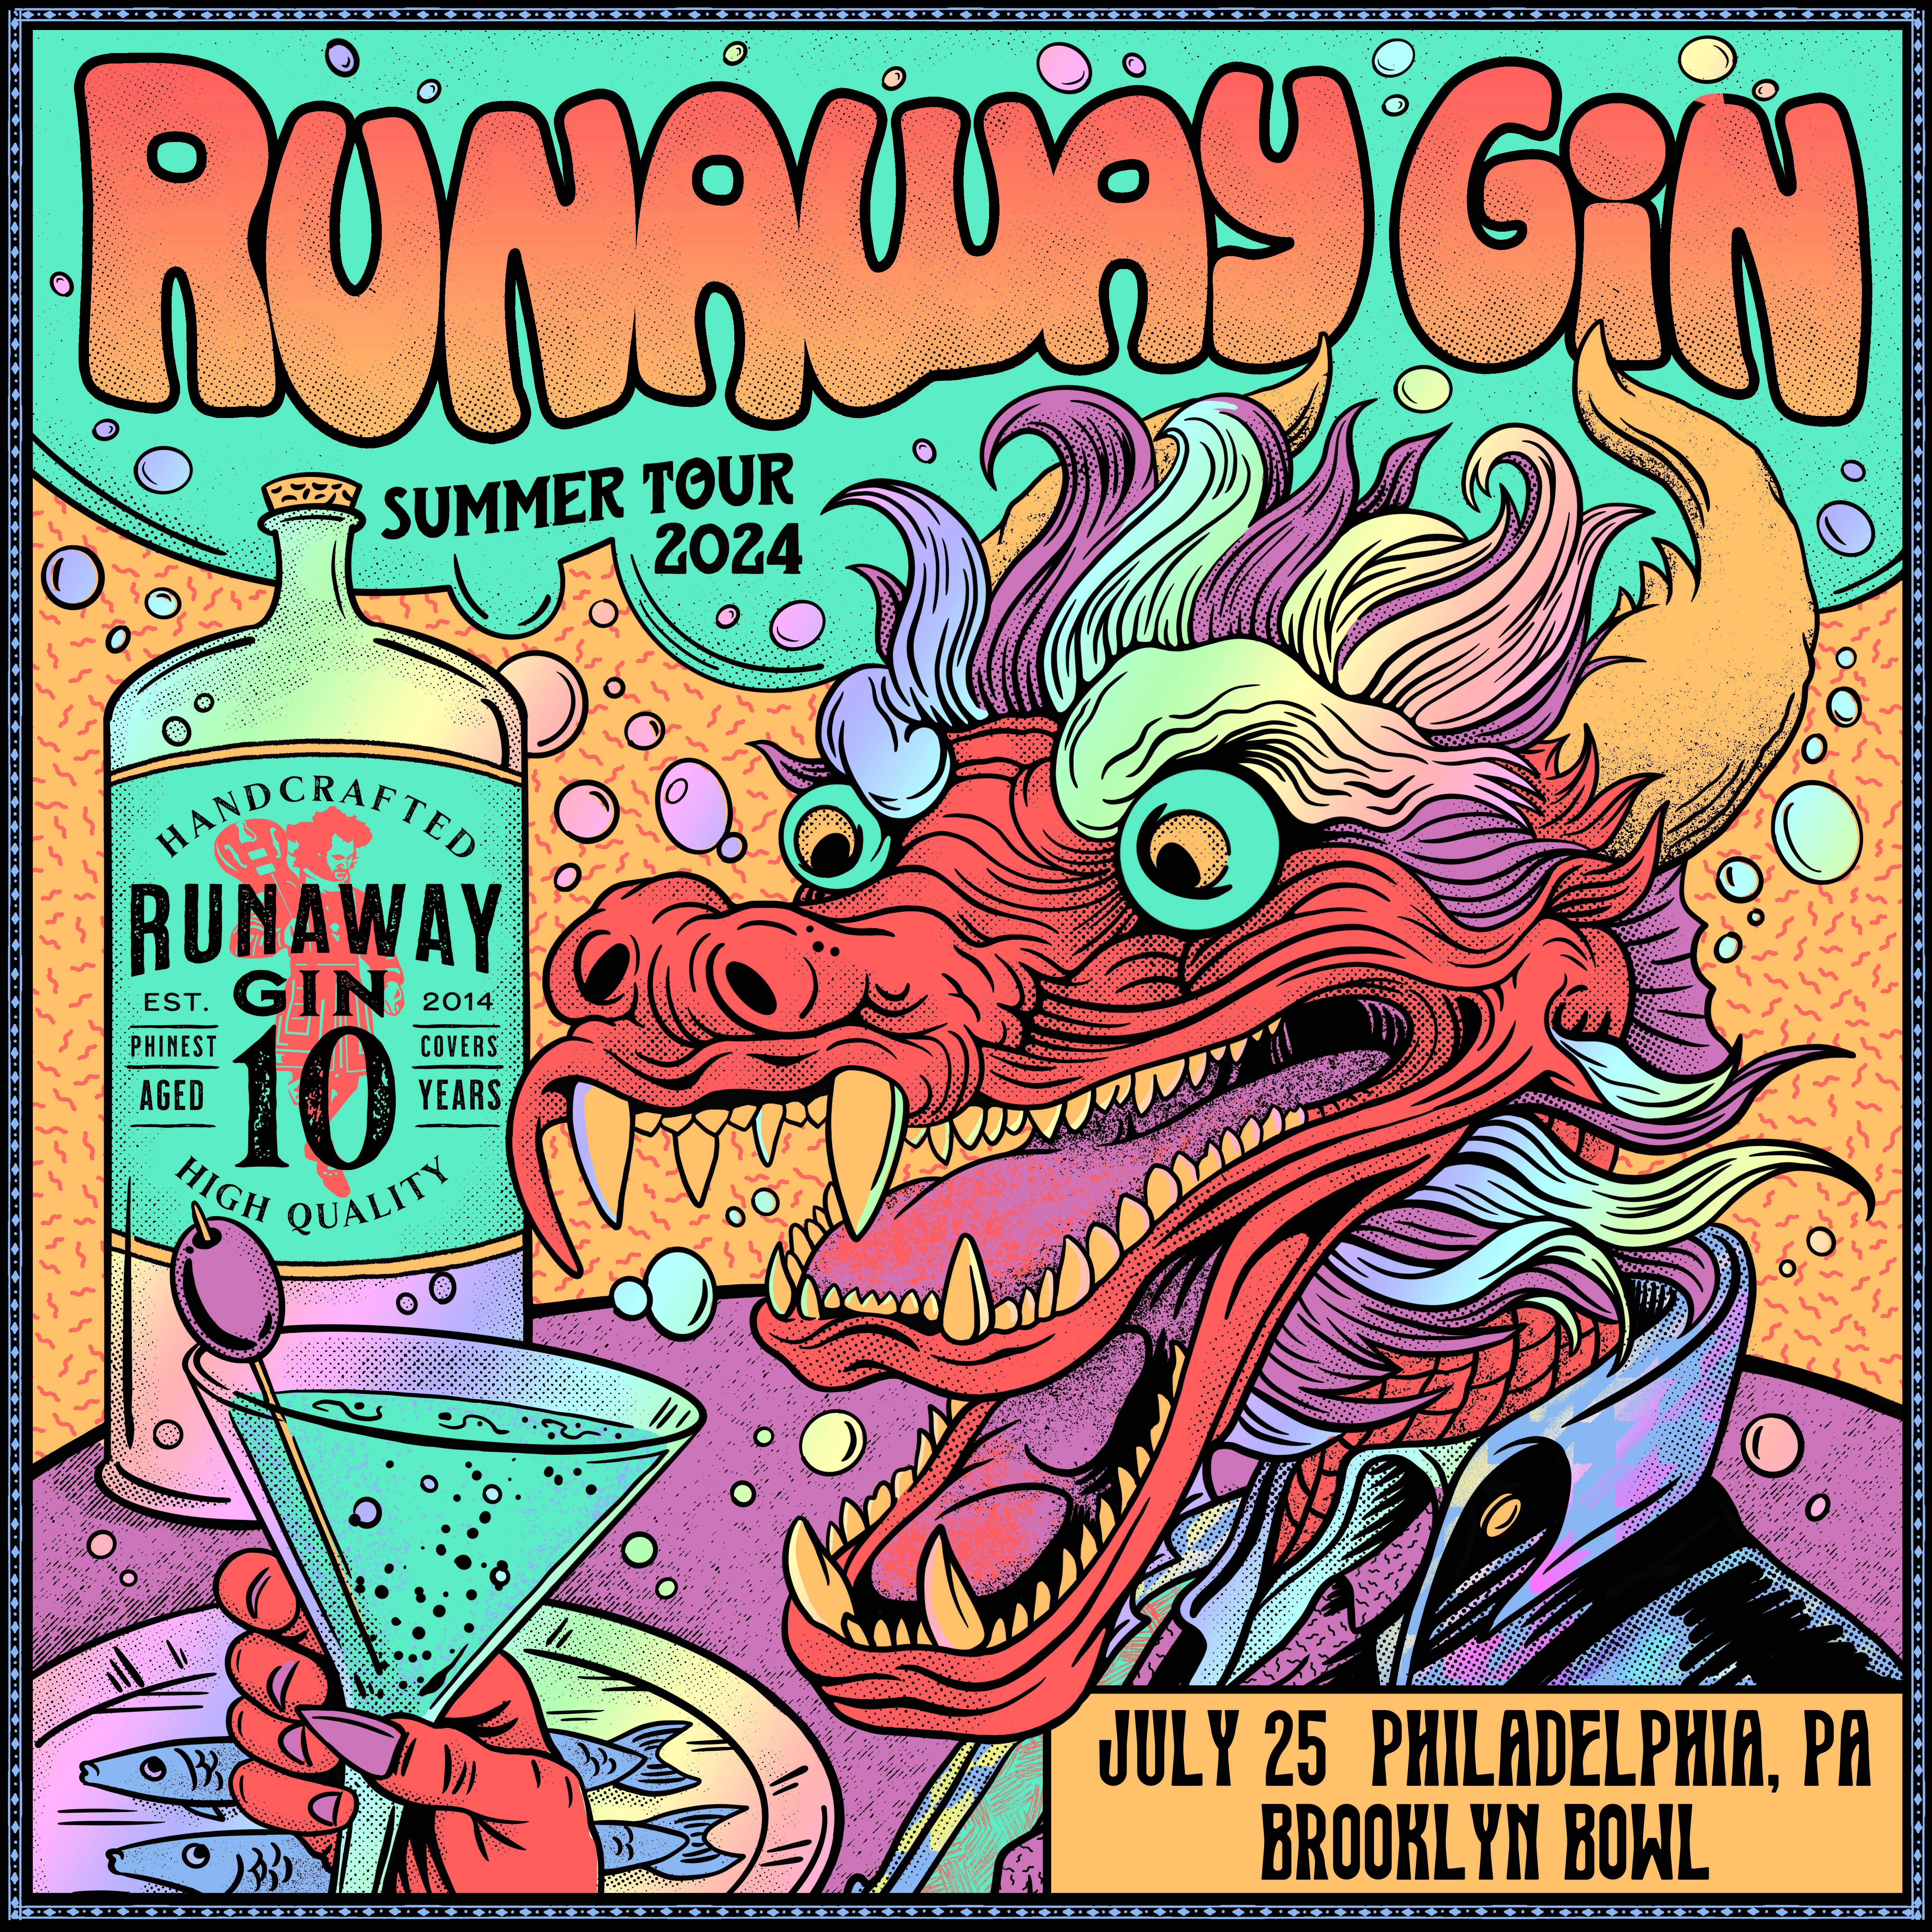 More Info for Runaway Gin (21+)